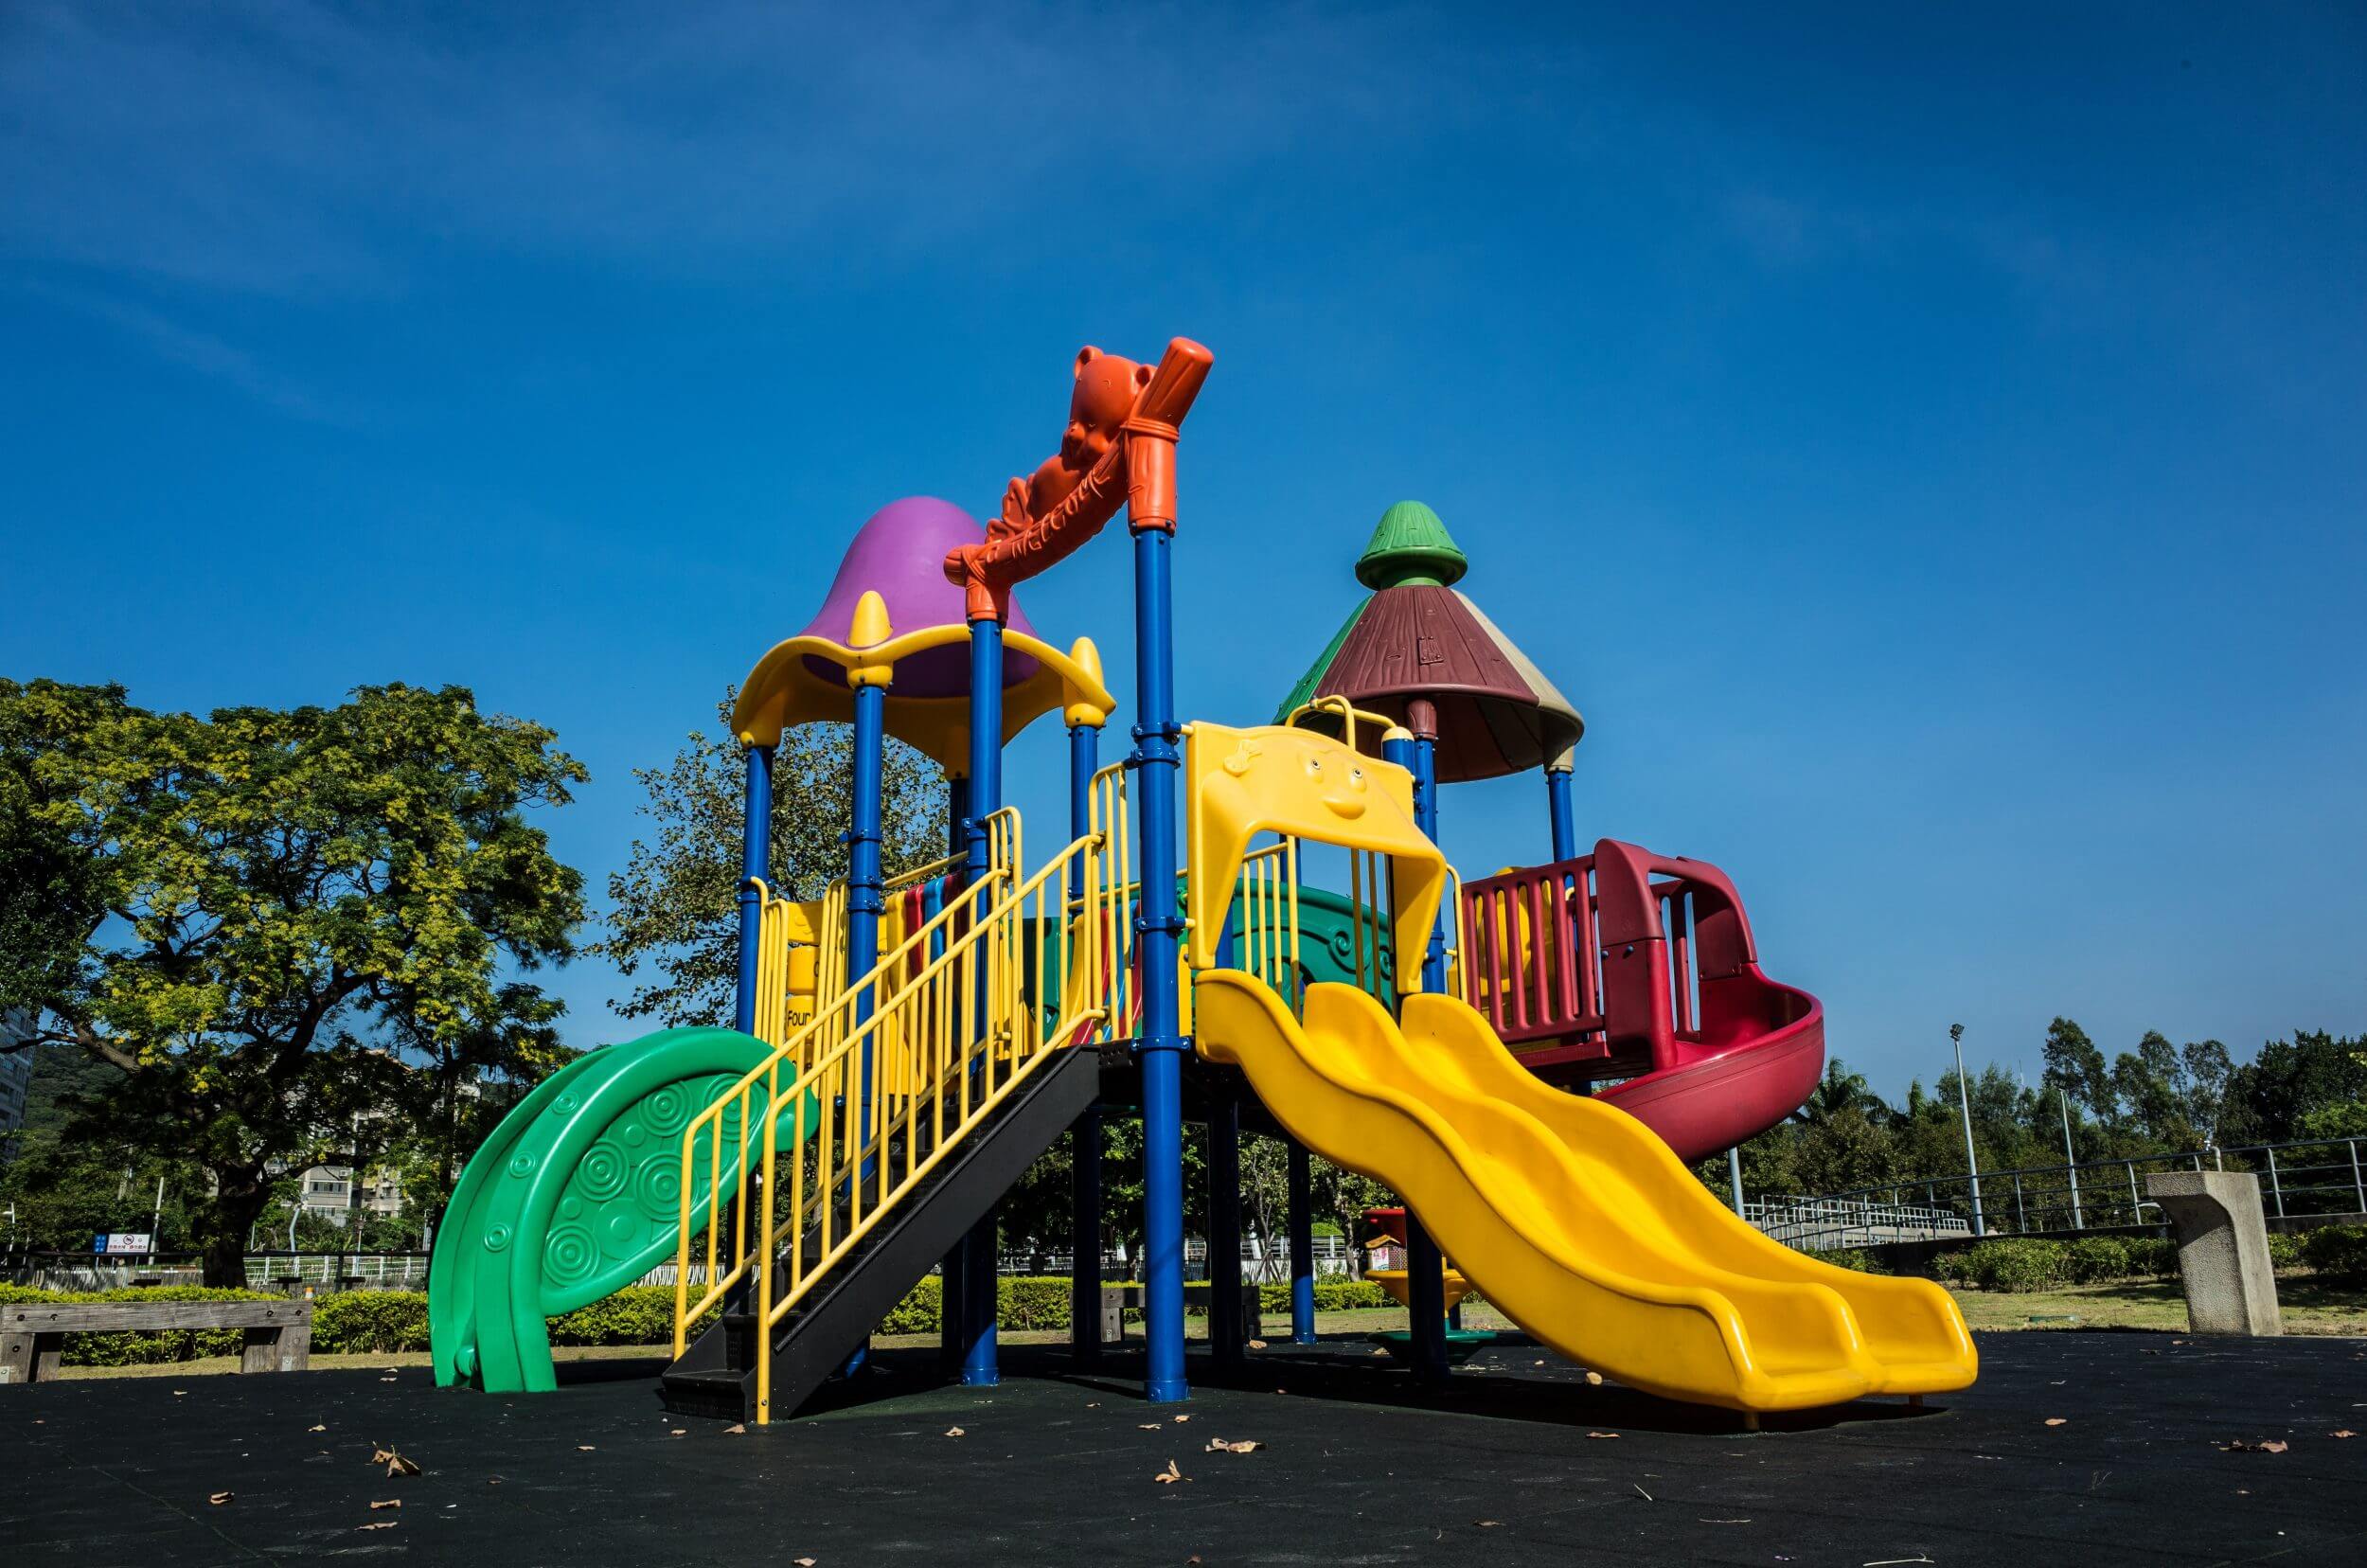 Playgrounds are a popular reason why schools fundraise